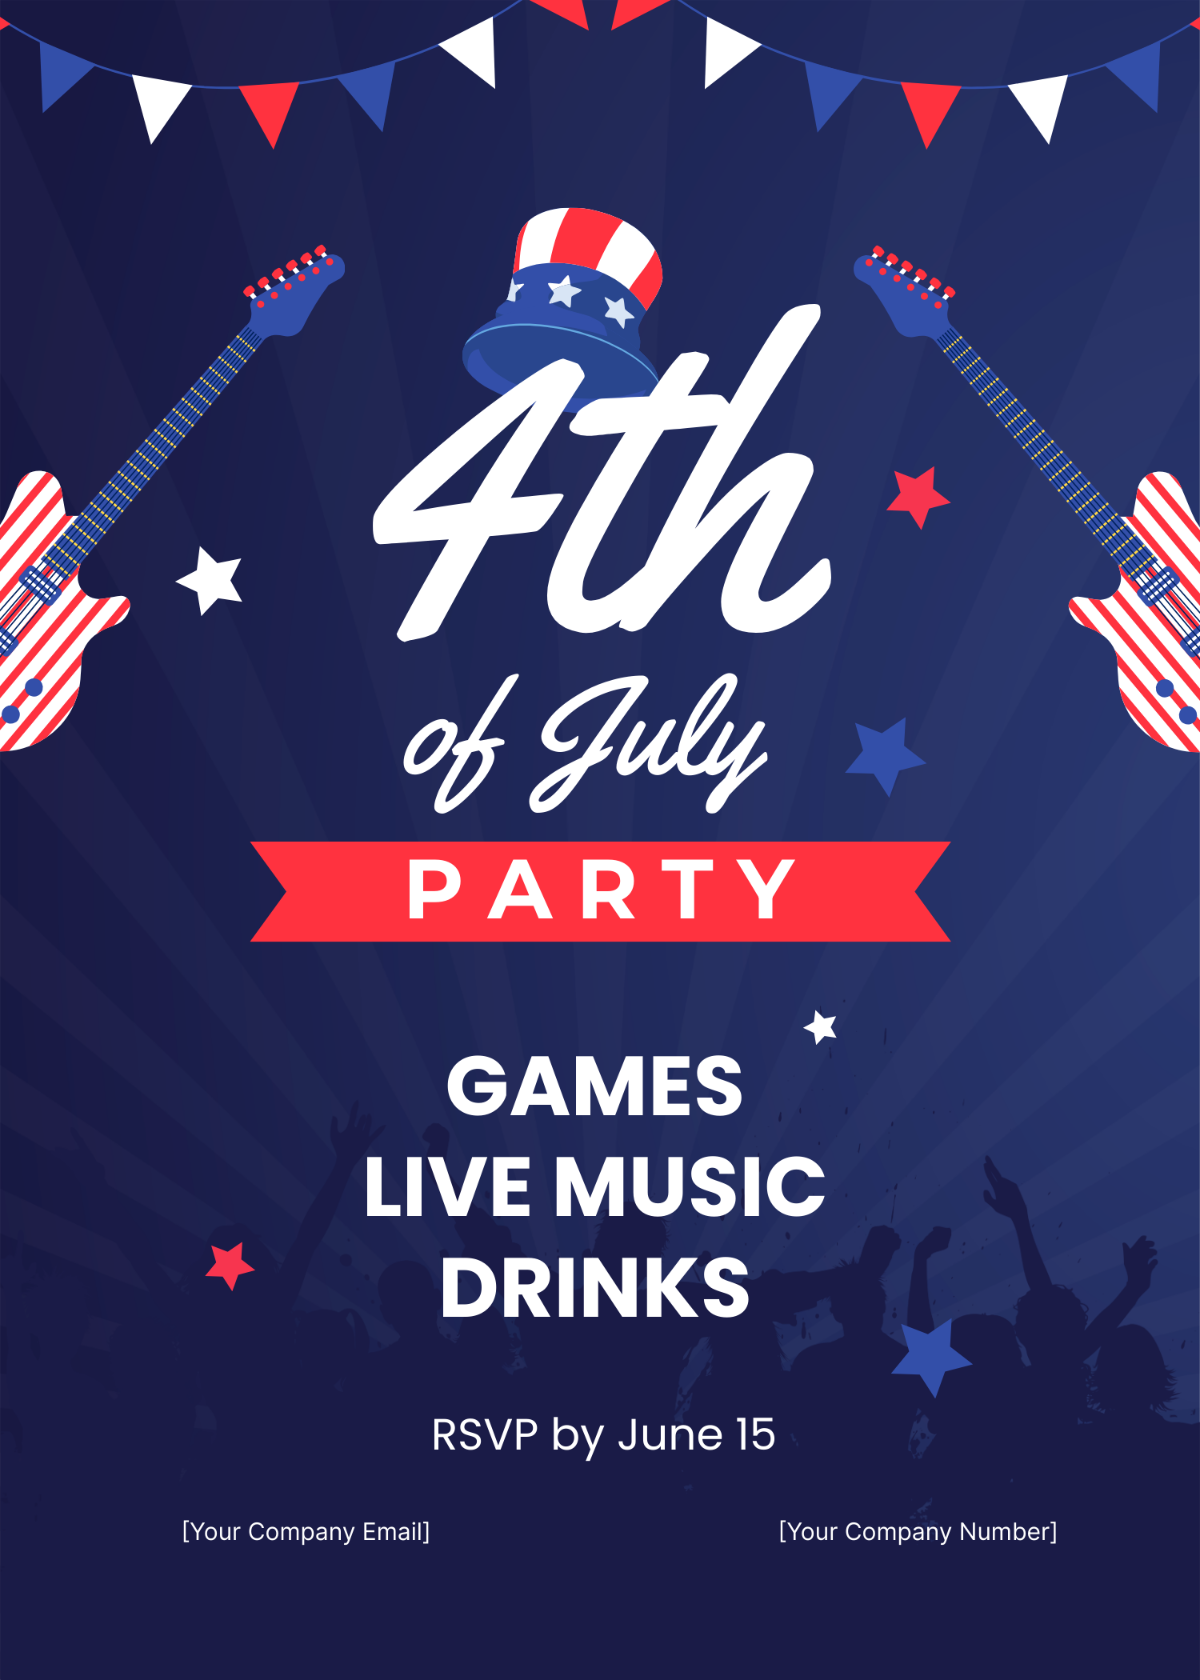 4th of July Party Invitation